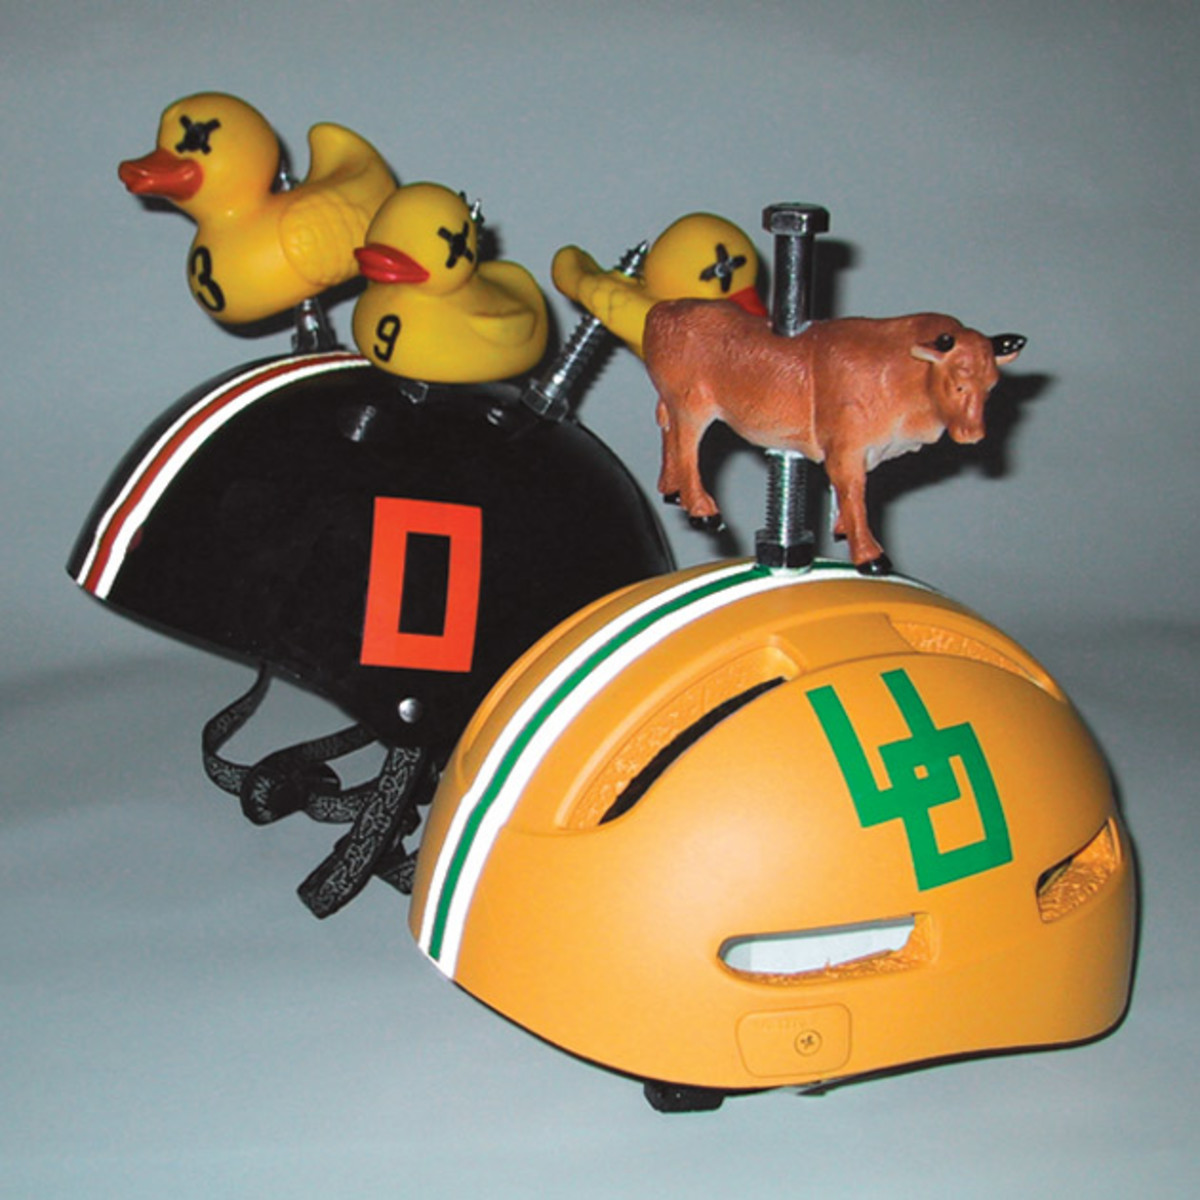 Morrow launched his own creative brand agency in 2000, the same time he toyed with making a fun helmet to support one of his clients, Oregon State University (pictured).